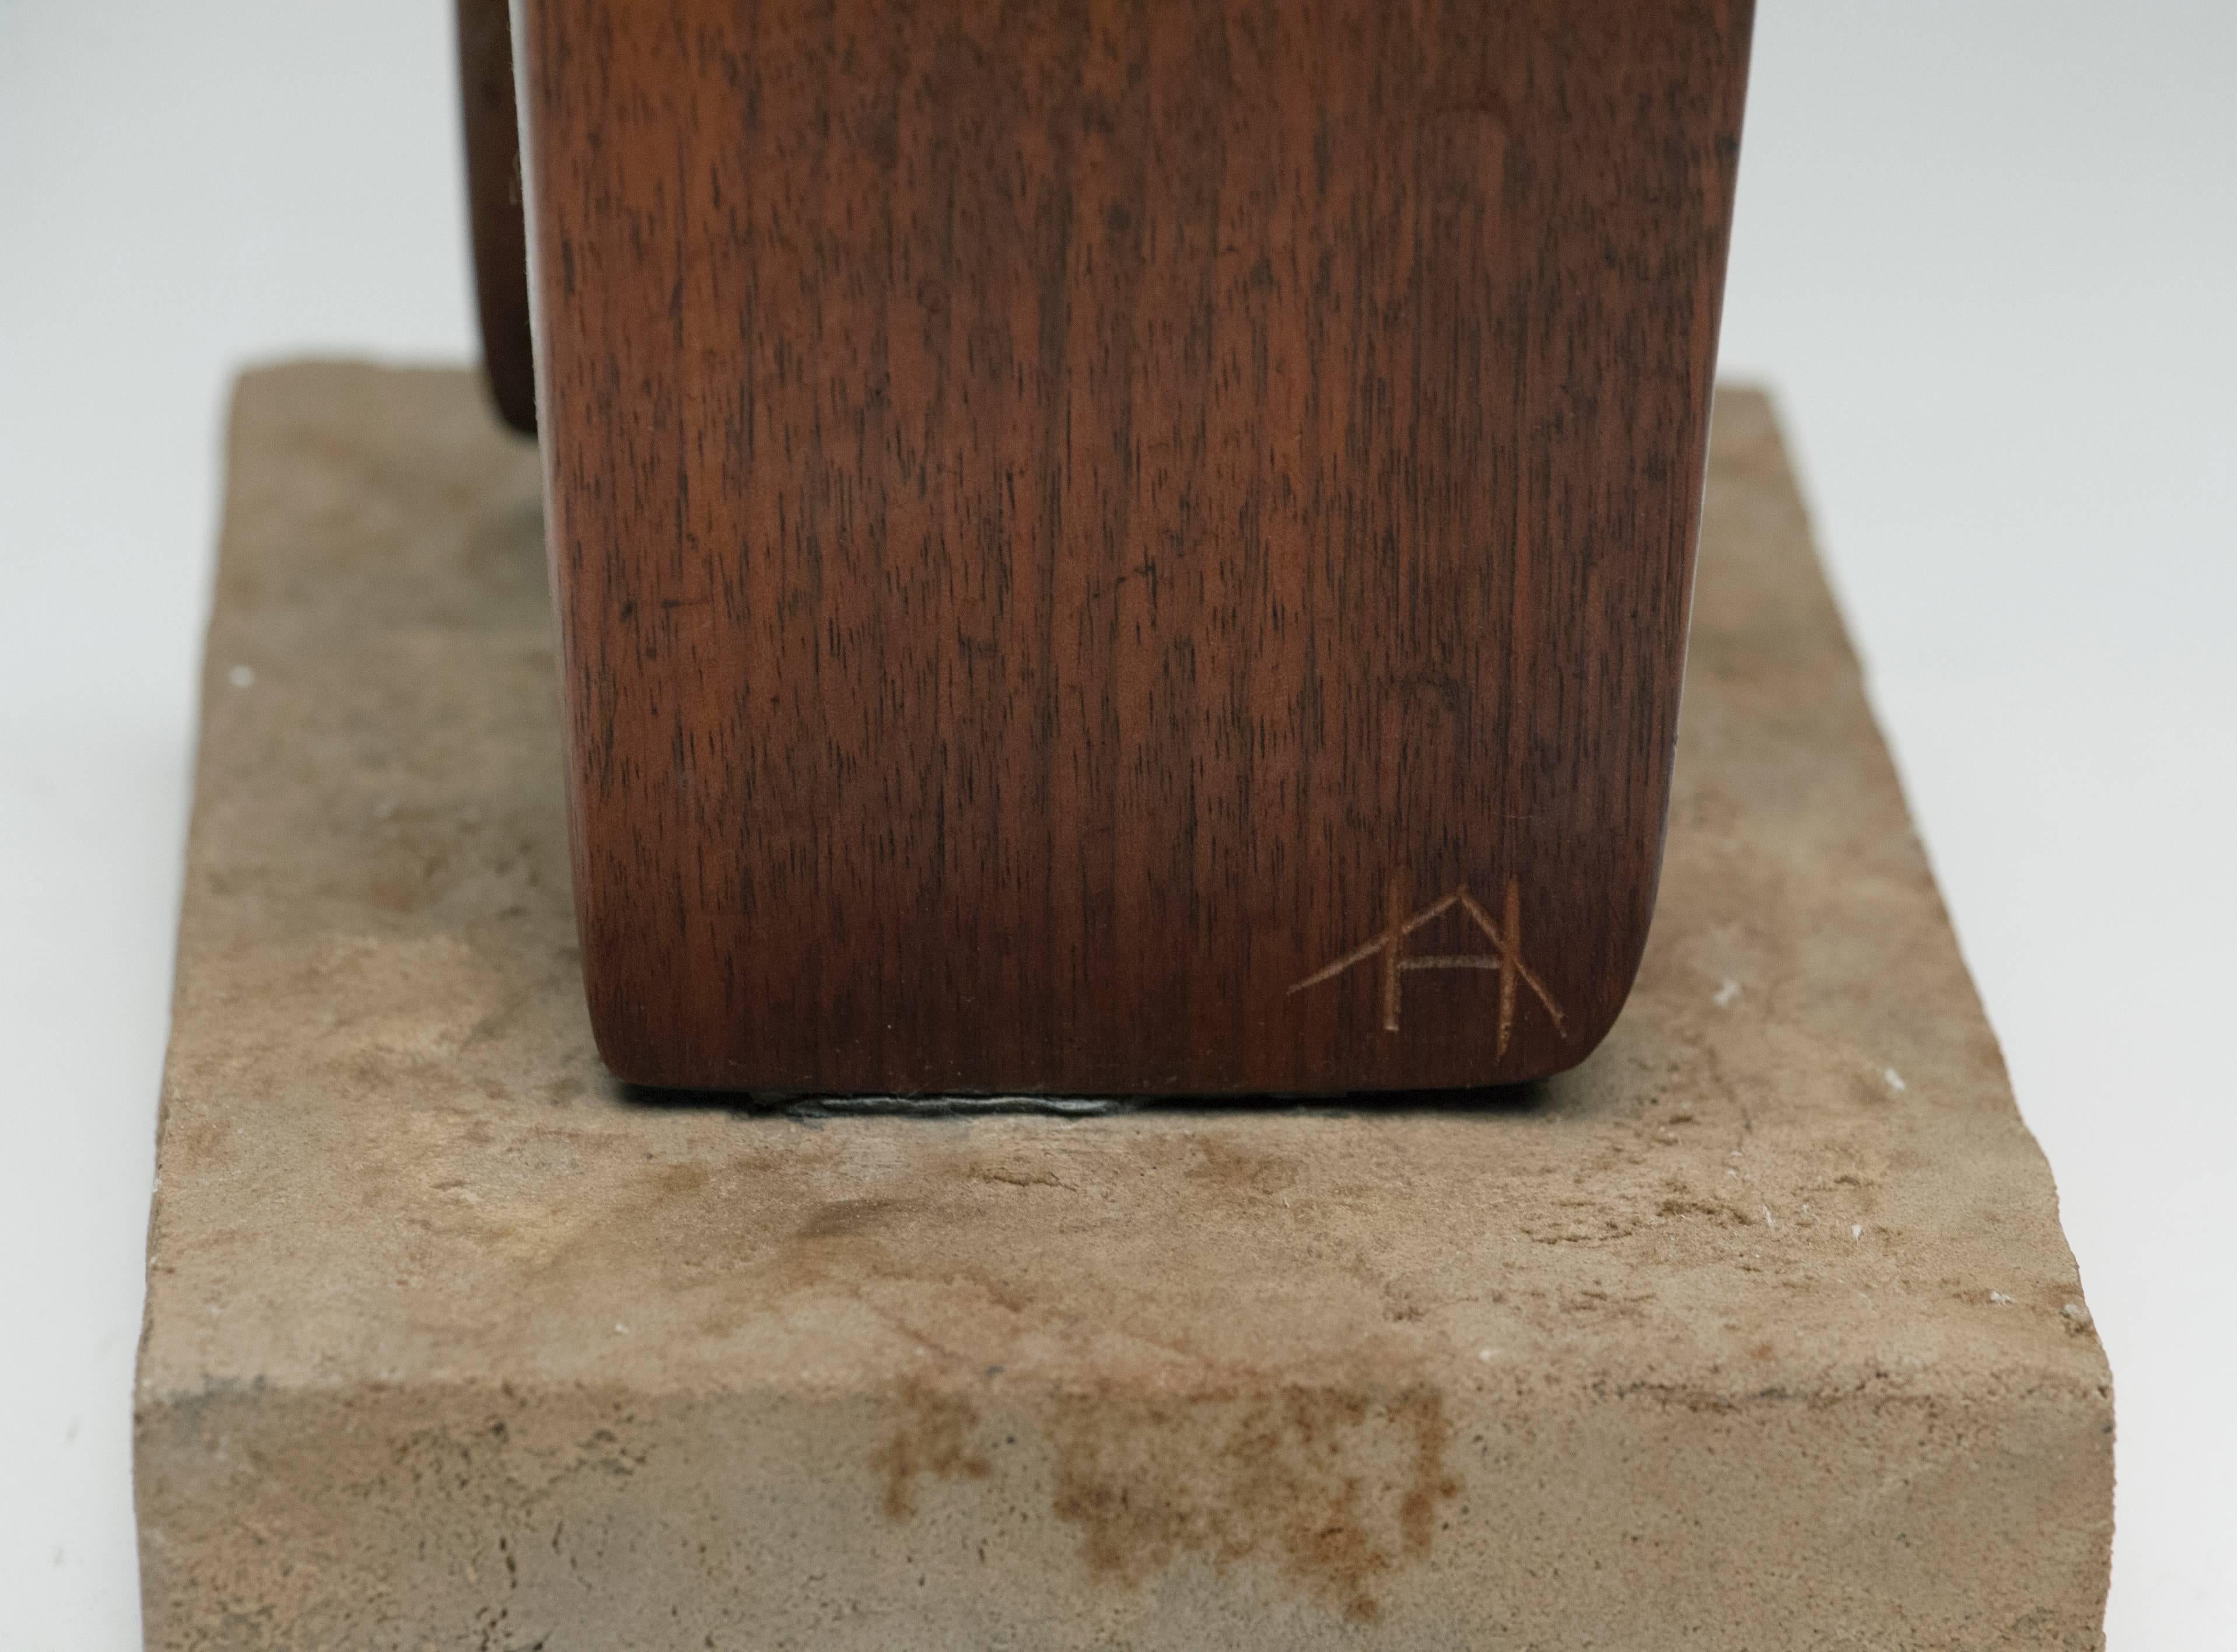 American Modern Abstract Wood Sculpture, Signed